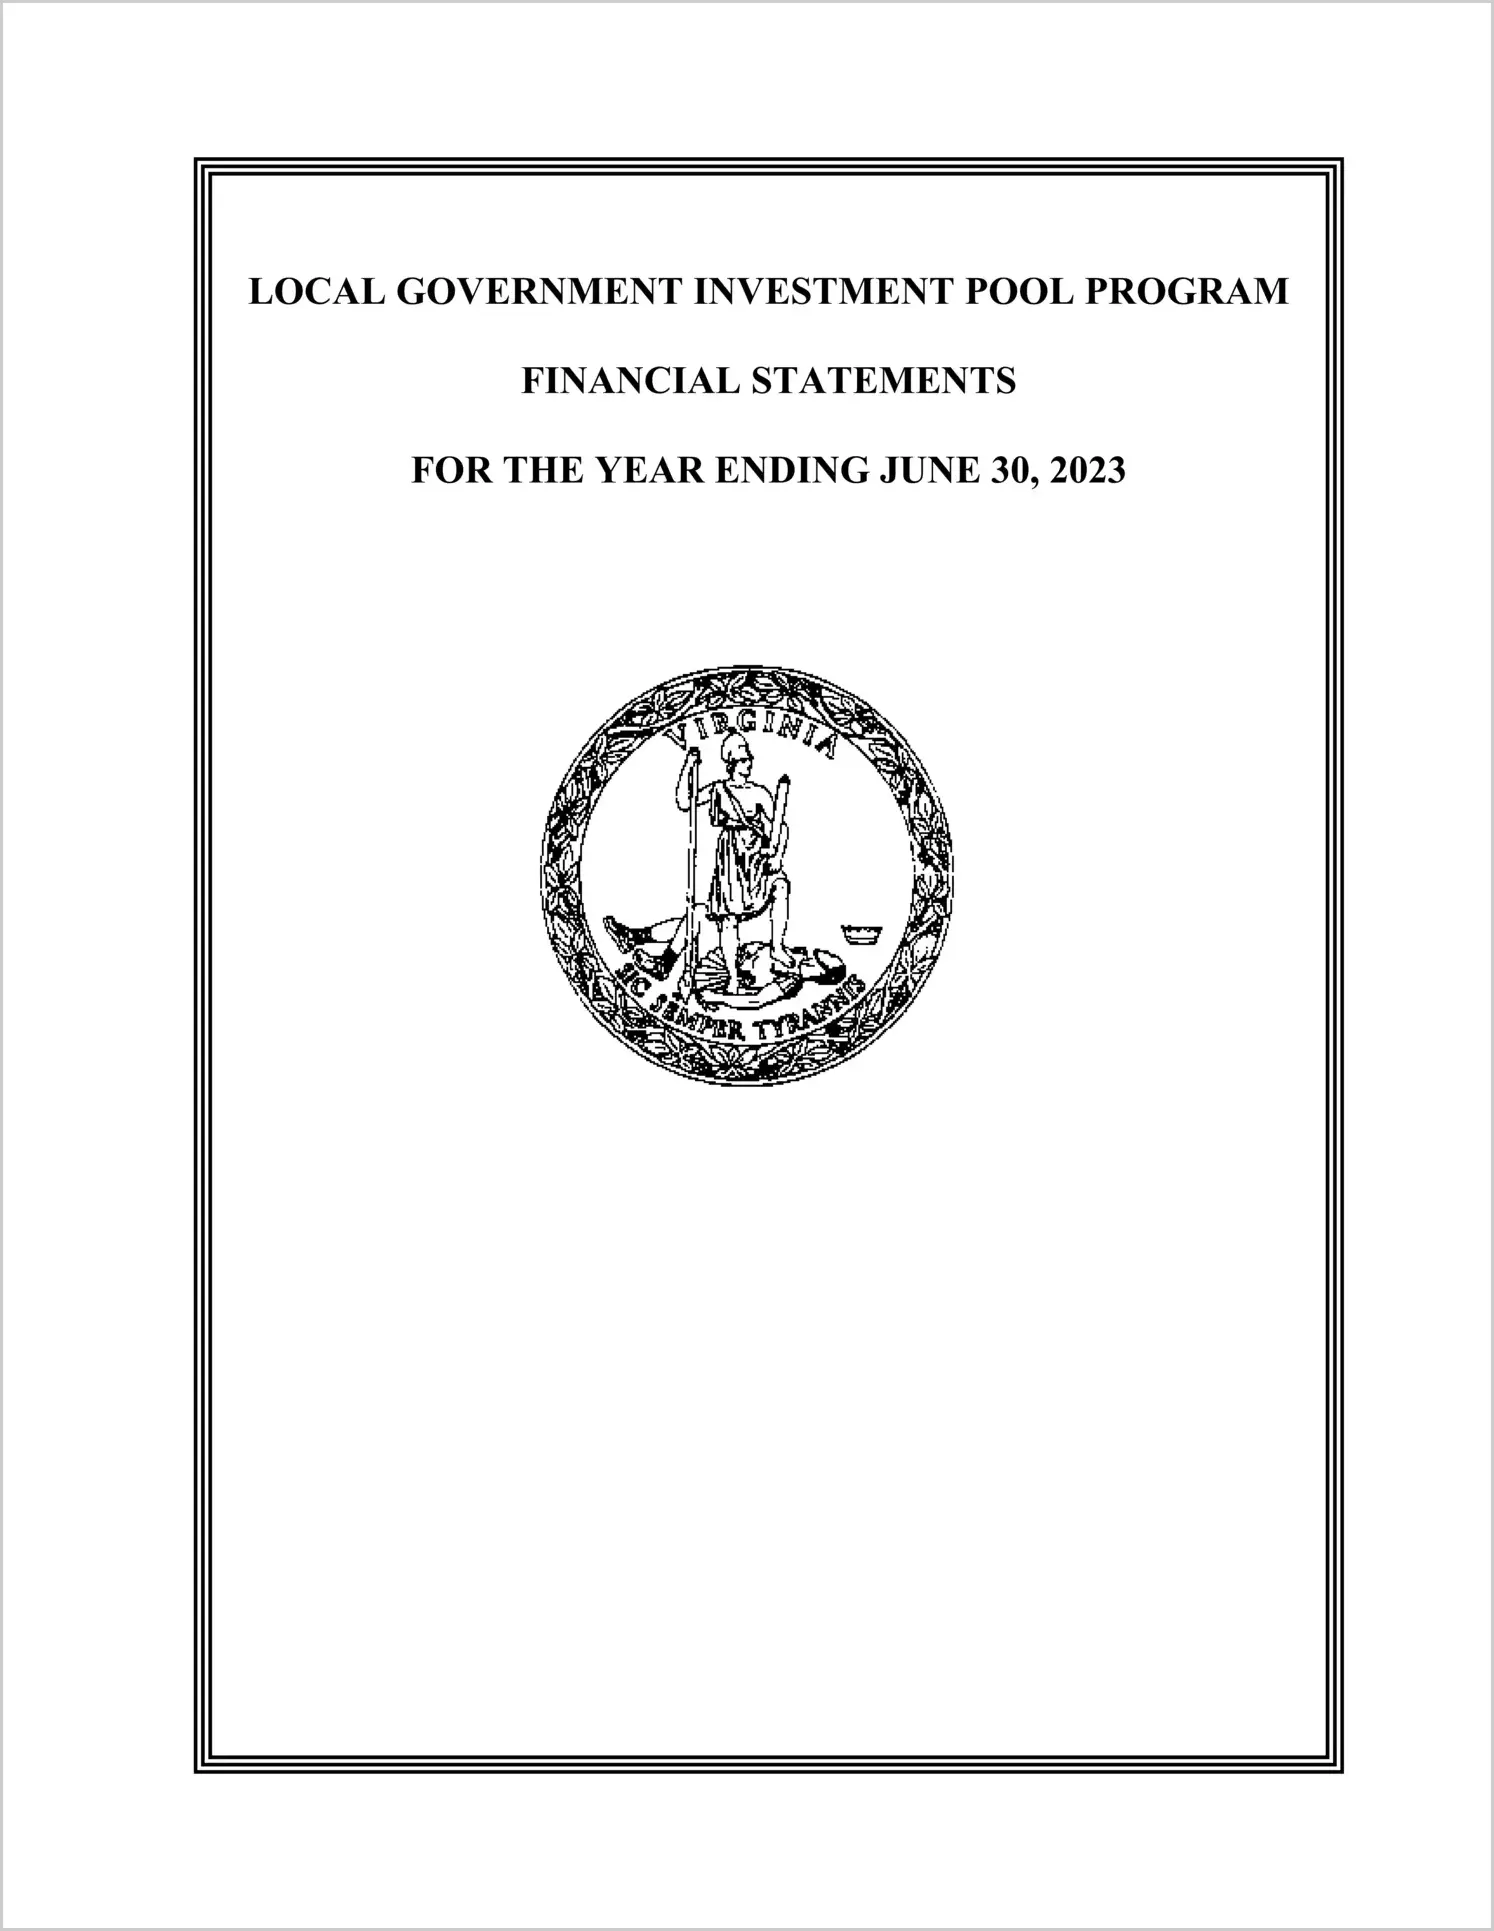 Local Government Investment Pool Program Financial Statements for the year ended June 30, 2023